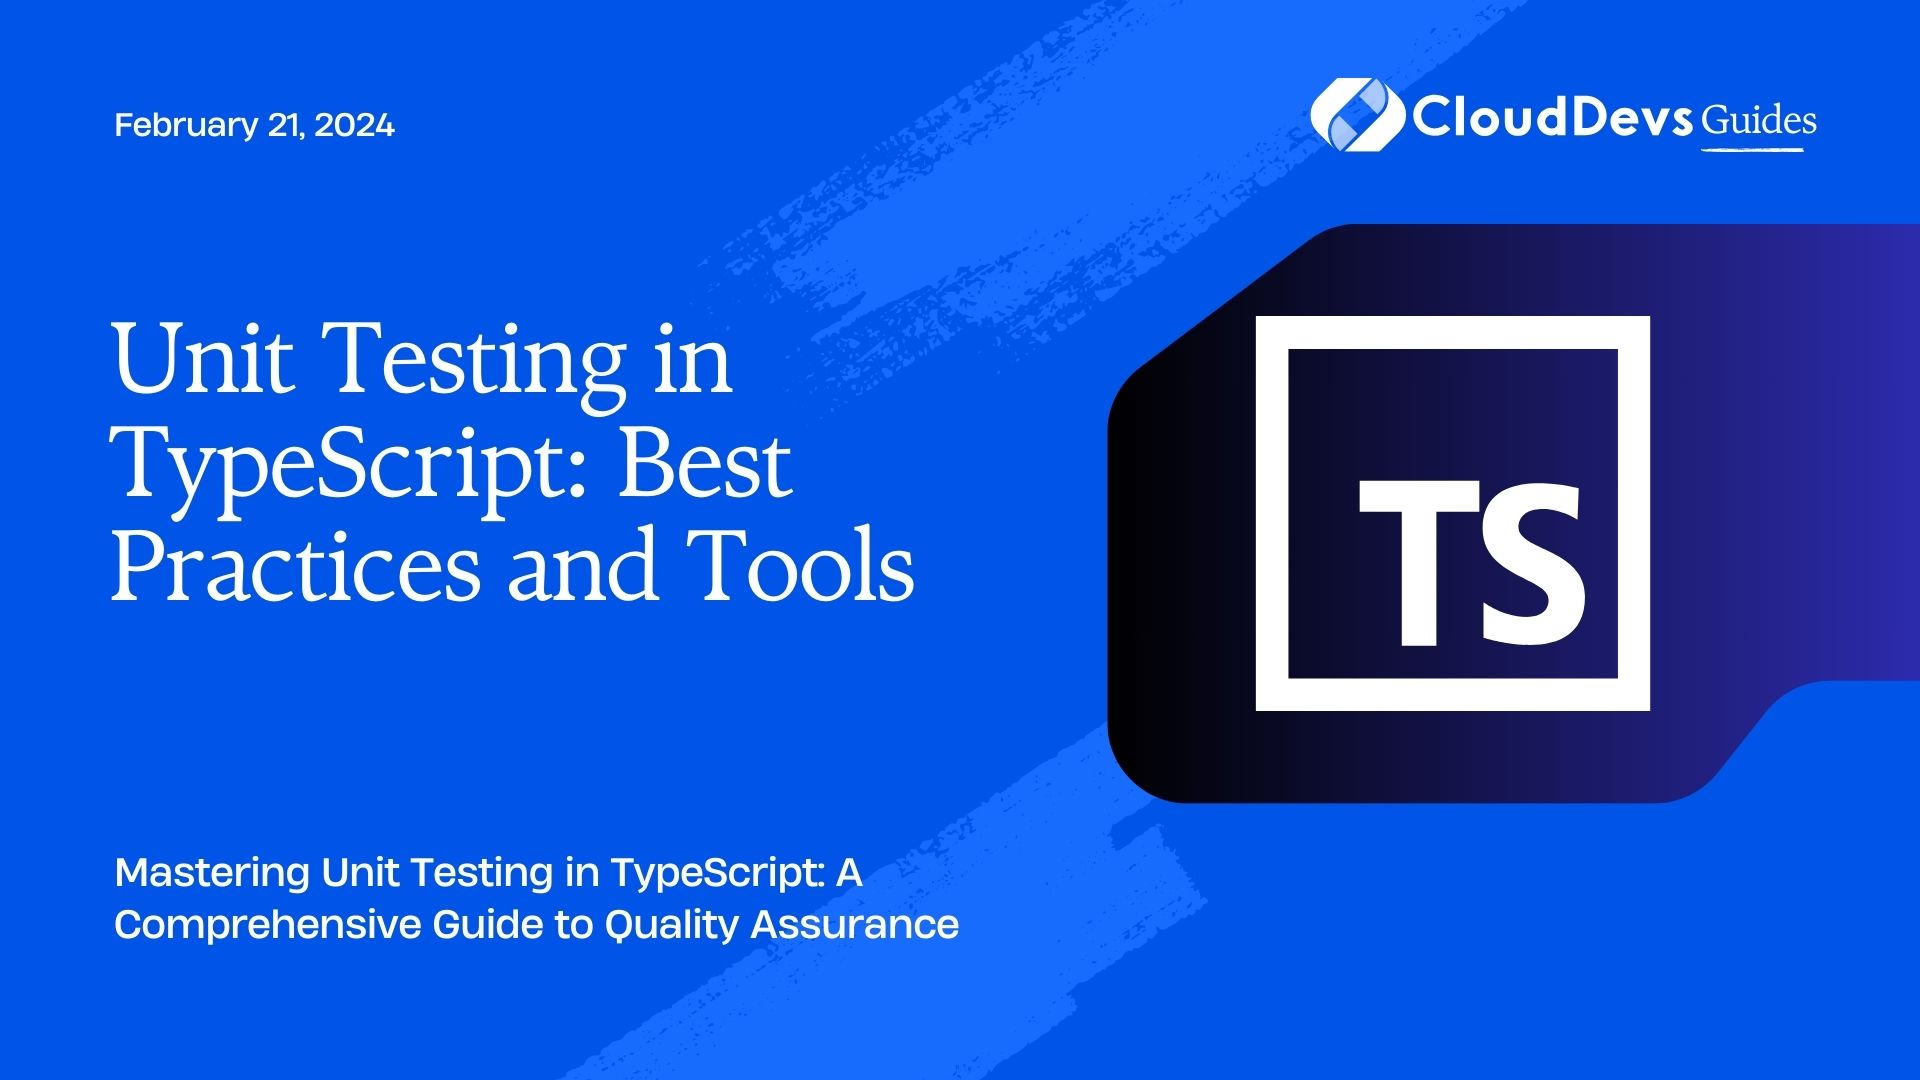 Unit Testing in TypeScript: Best Practices and Tools